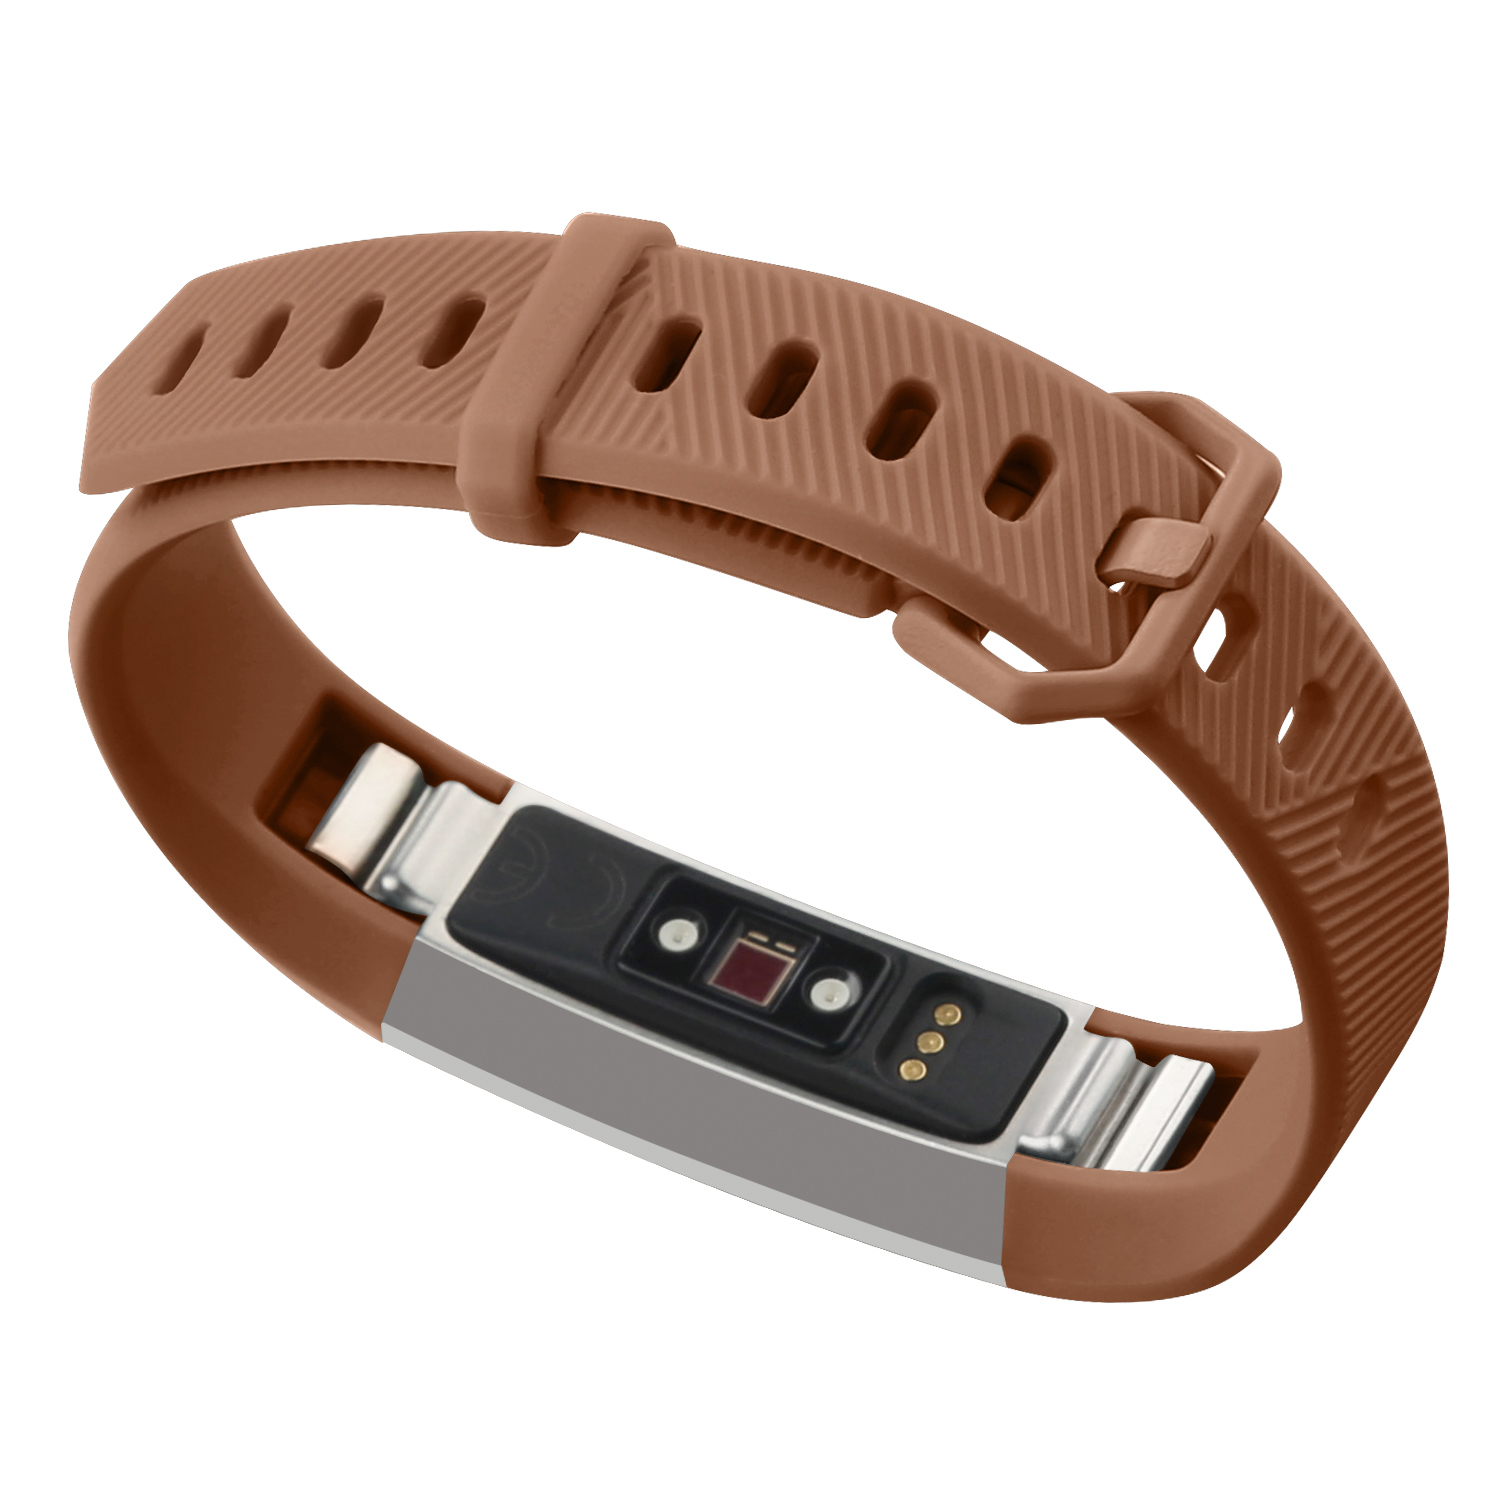 Fitbit Alta Bands Fitbit Alta HR Strap Adjustable Replacement Wrist Bands Soft Silicone Material Strap(Brown, Small) - image 3 of 7